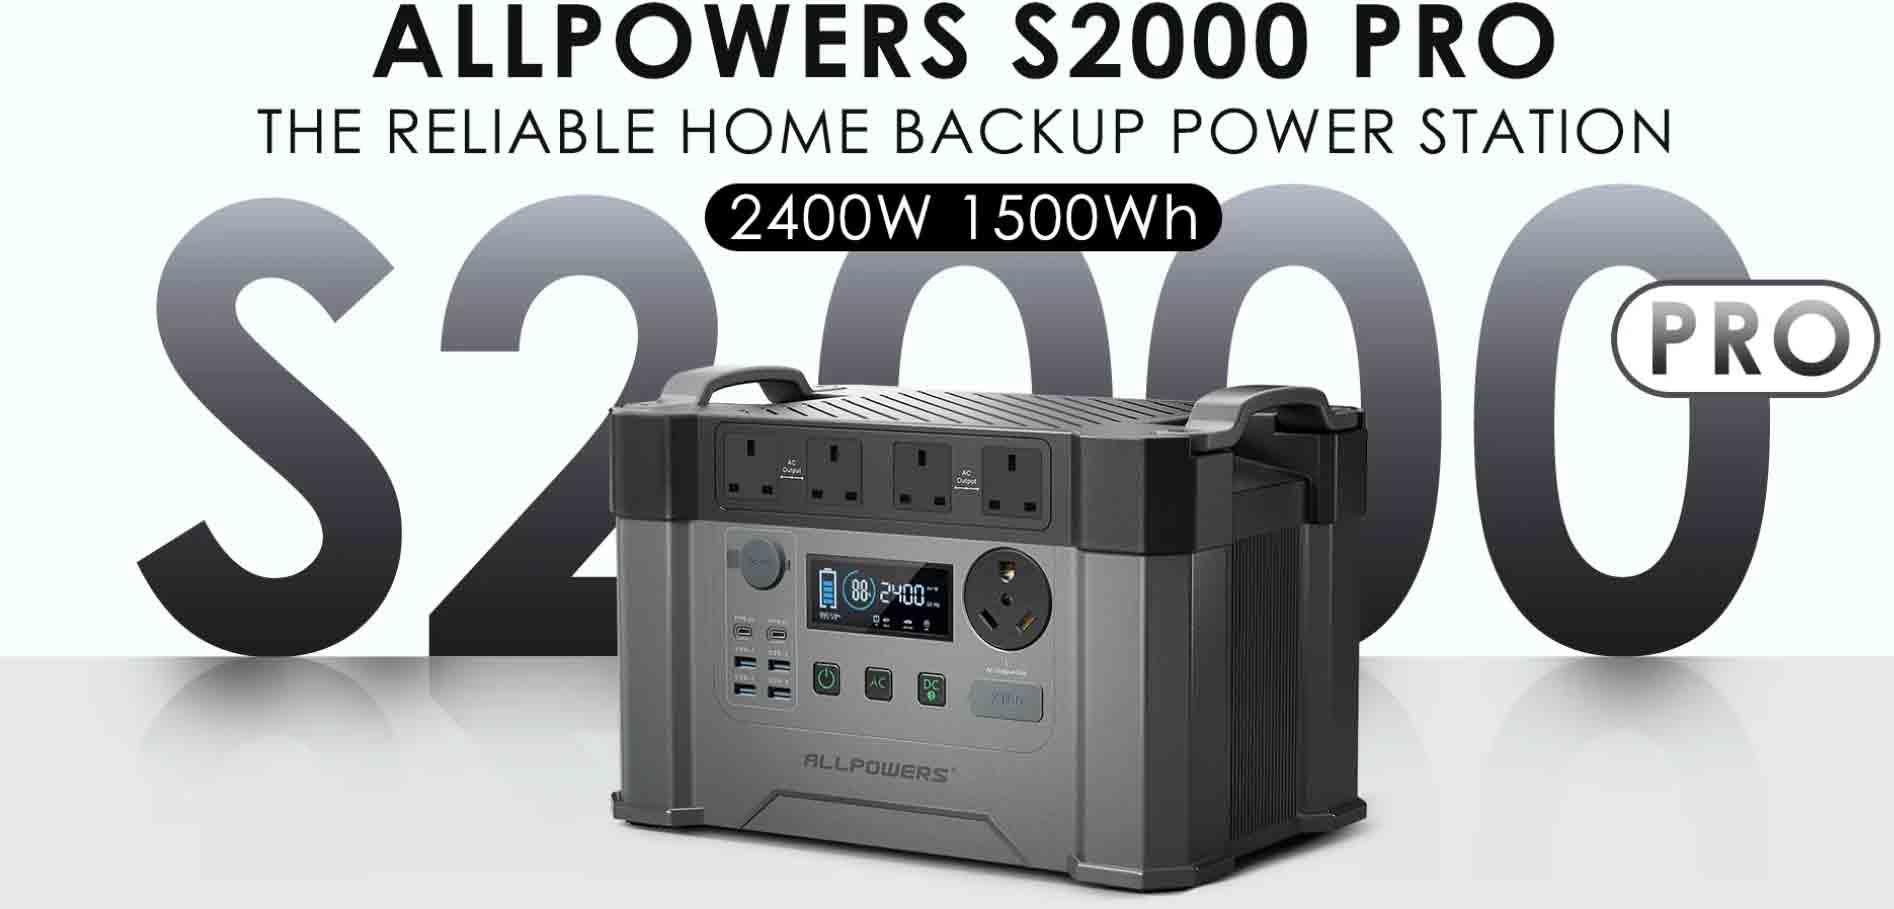 ALLPOWERS S2000 Pro Portable Power Station